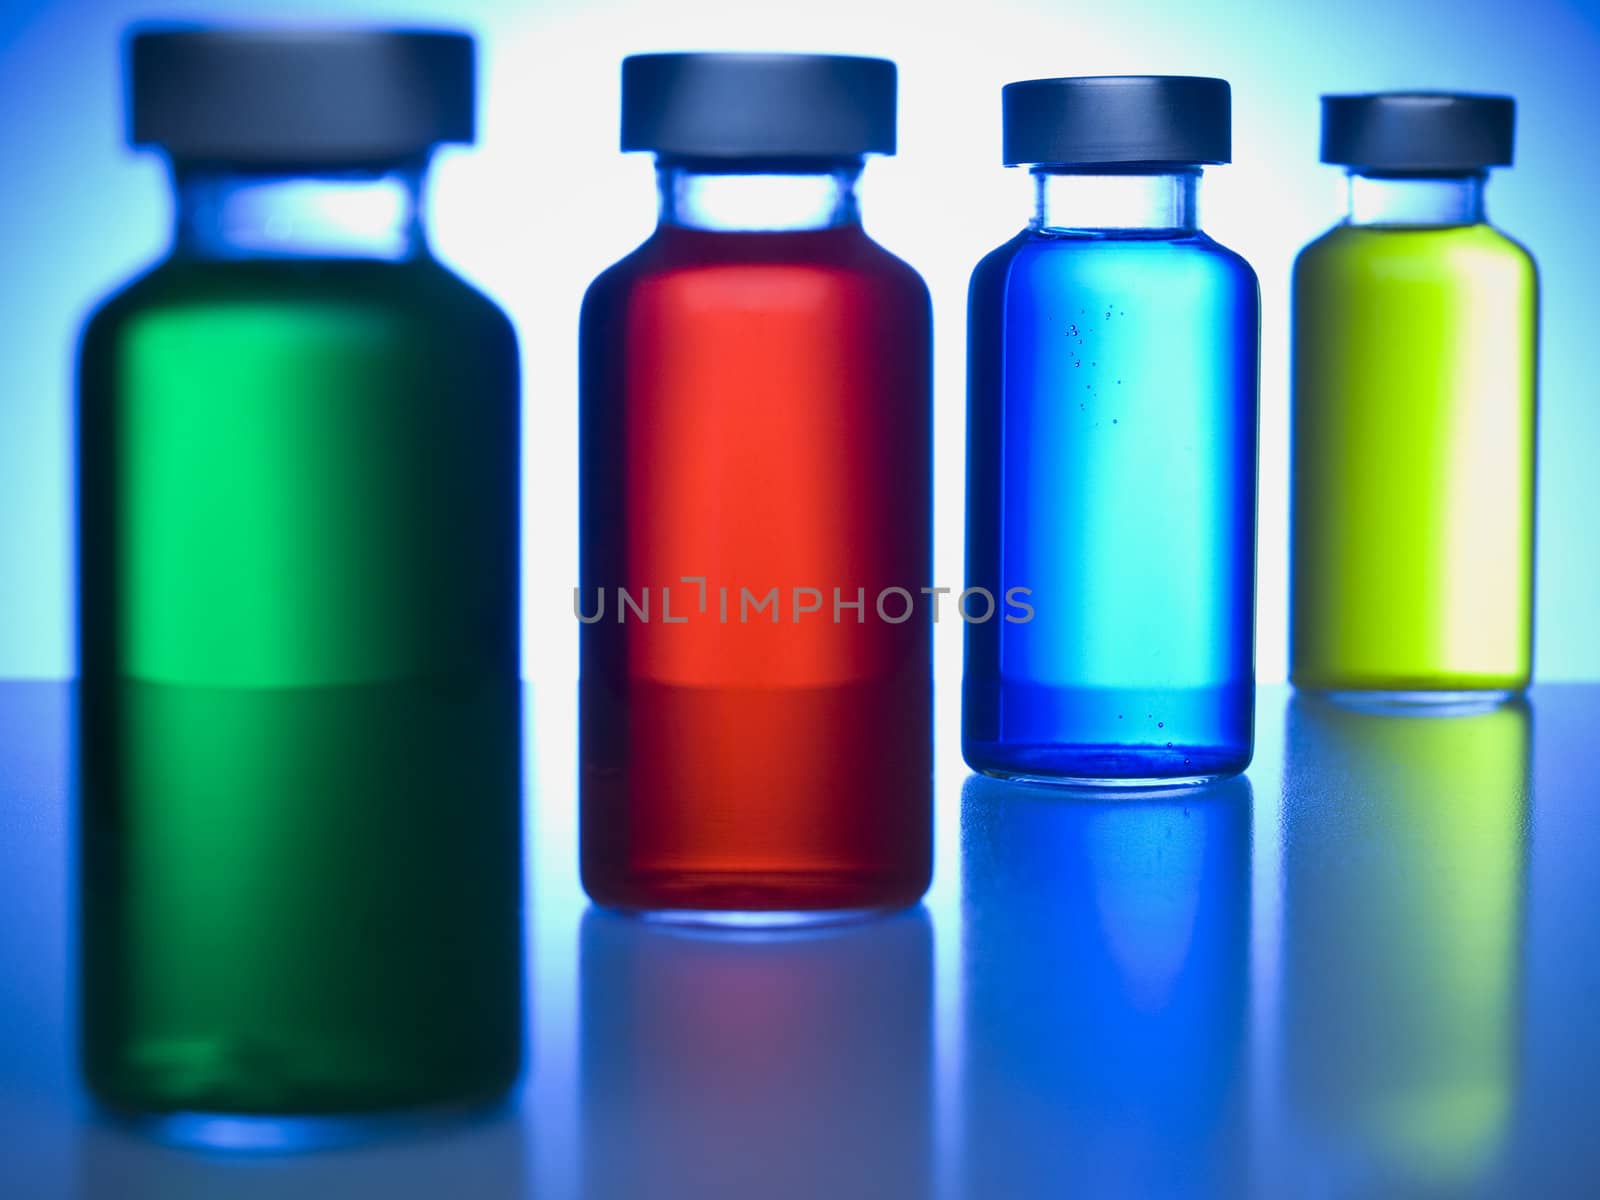 A row of vials filled with colored liquids. Focus on the blue one.